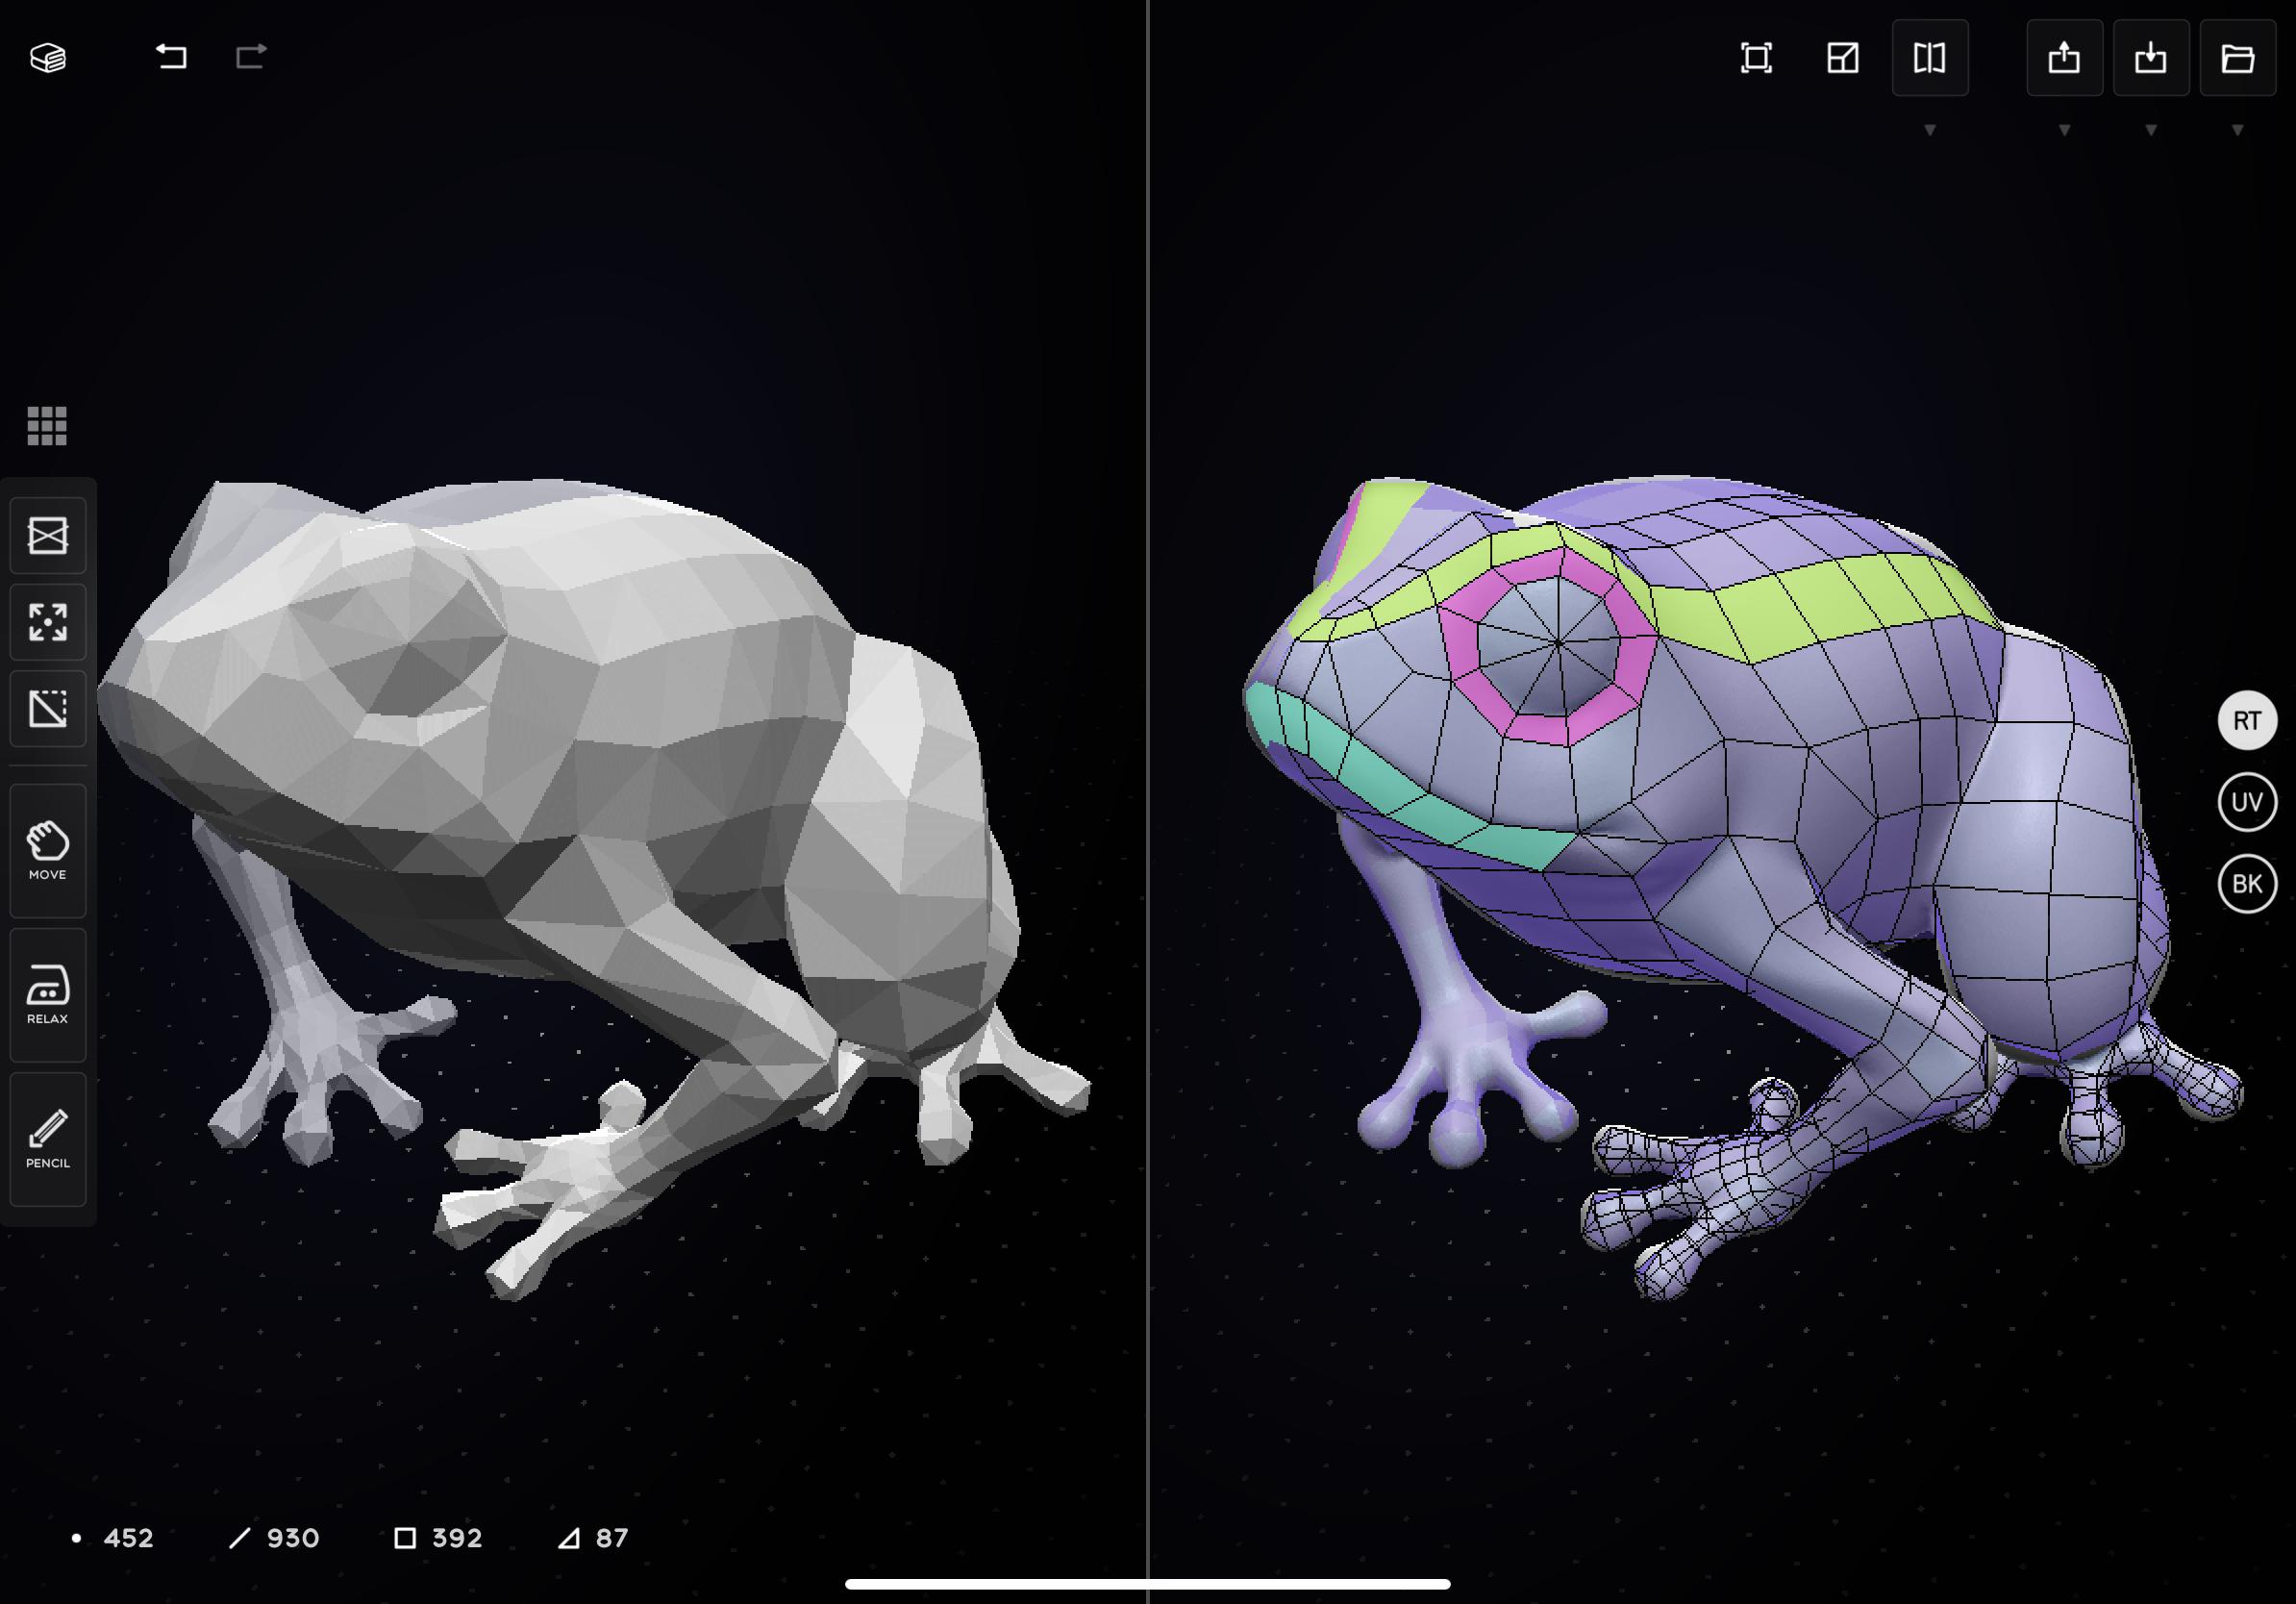 Pablo Dobarro on X: Here is a workflow tutorial on how to create low poly,  hand-painted models using Nomad Sculpt (1.68), CozyBlanket (2.0.3) and  Procreate (5.2.9) without leaving the iPad:  /